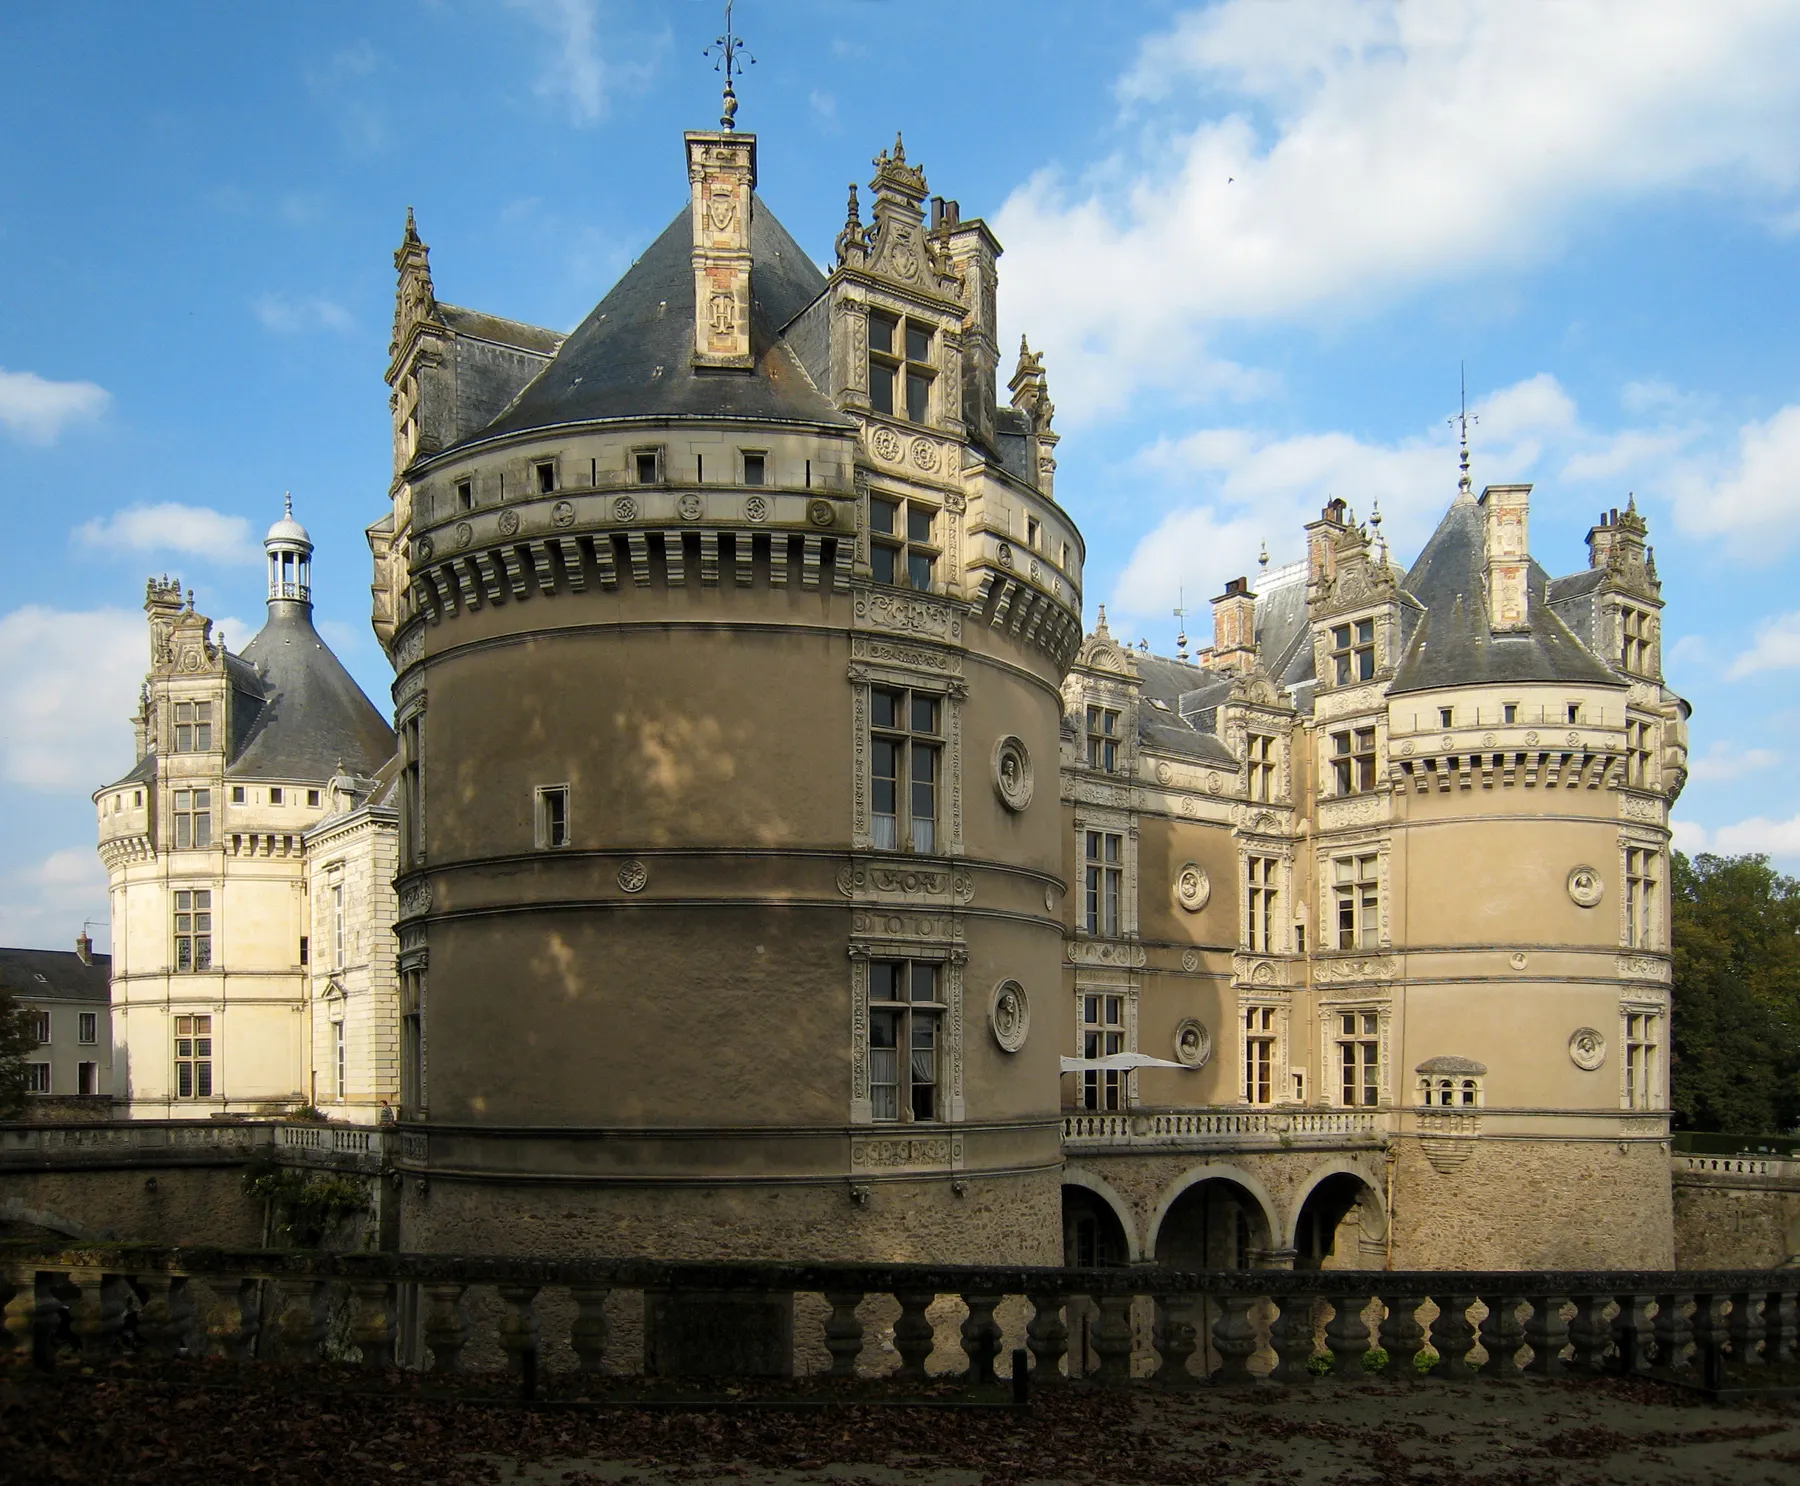 Photo showing: Castle Le Lude, located on the river Loir (not Loire) in the county of Sarthe/France